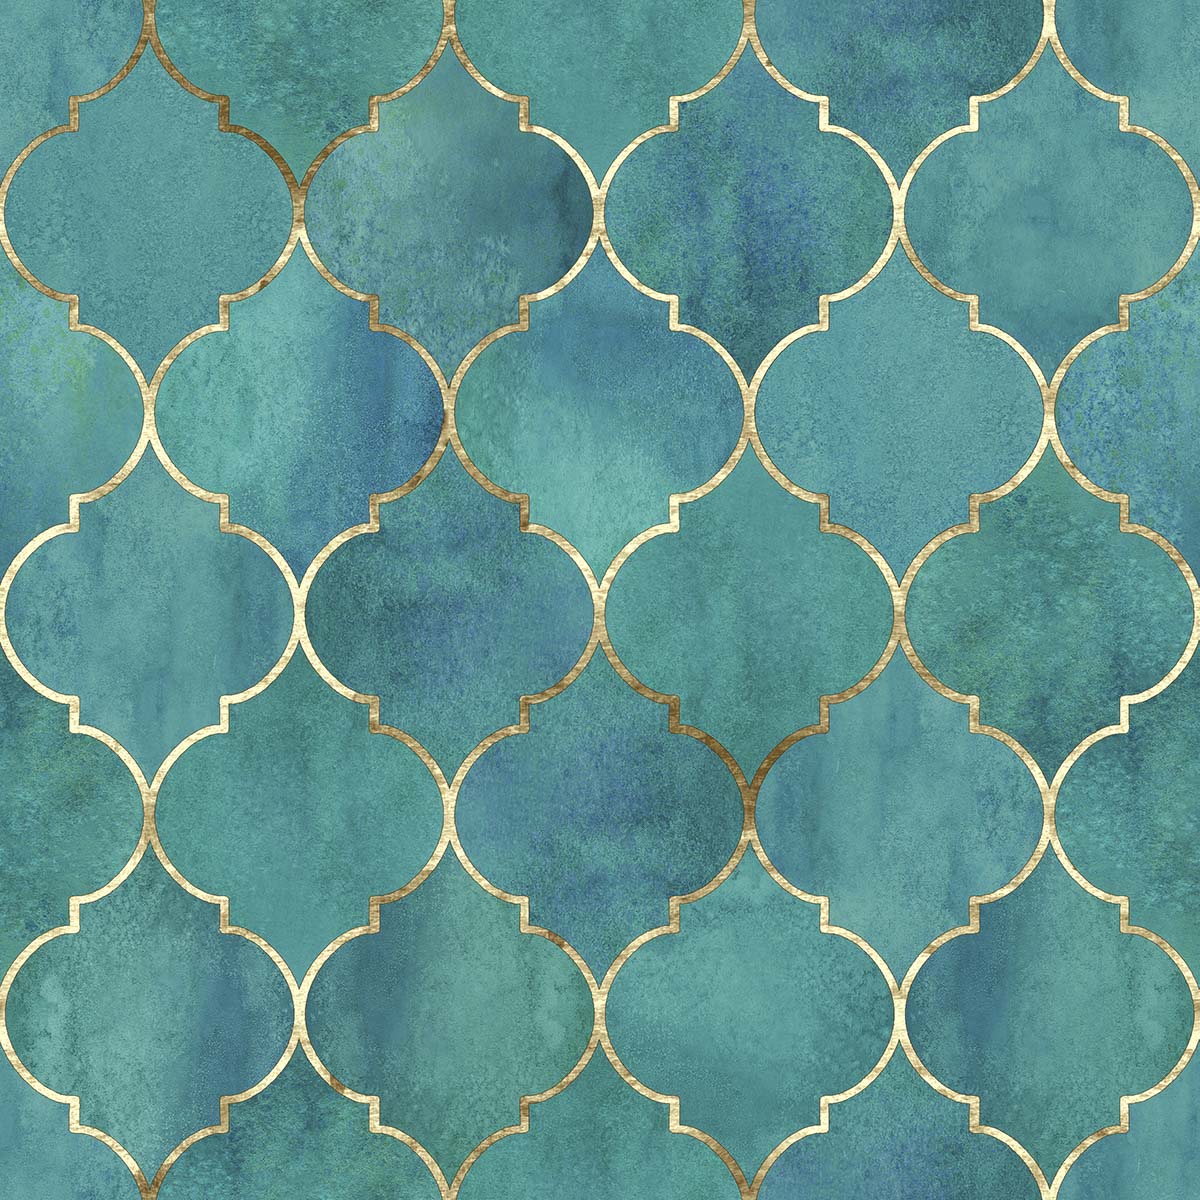 A blue and green pattern